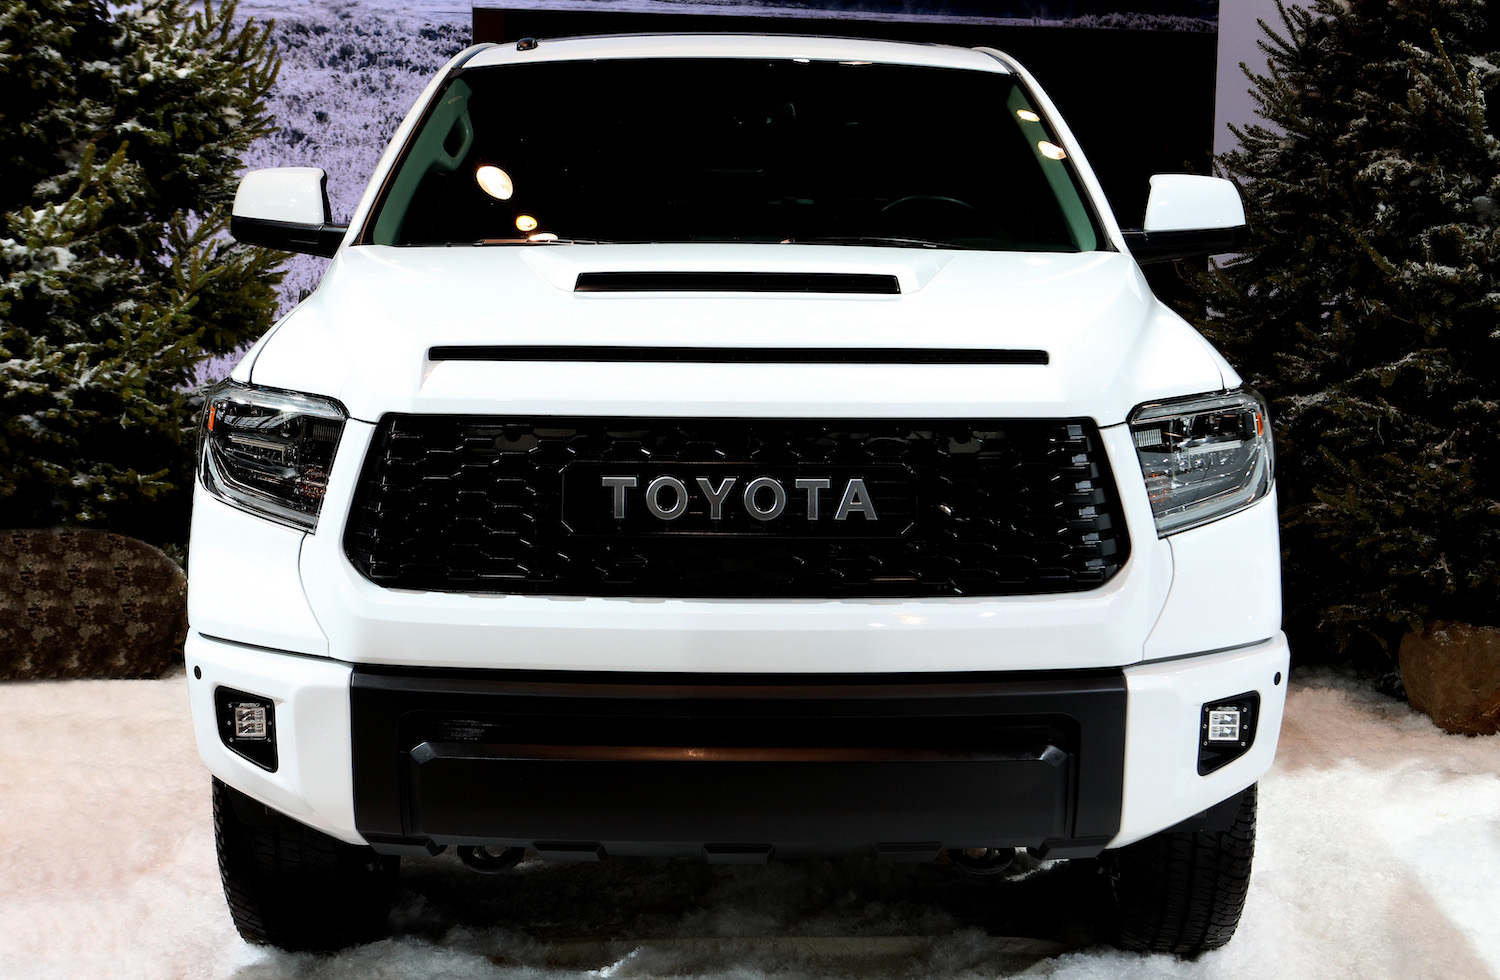 A white Toyota Tundra at an auto show